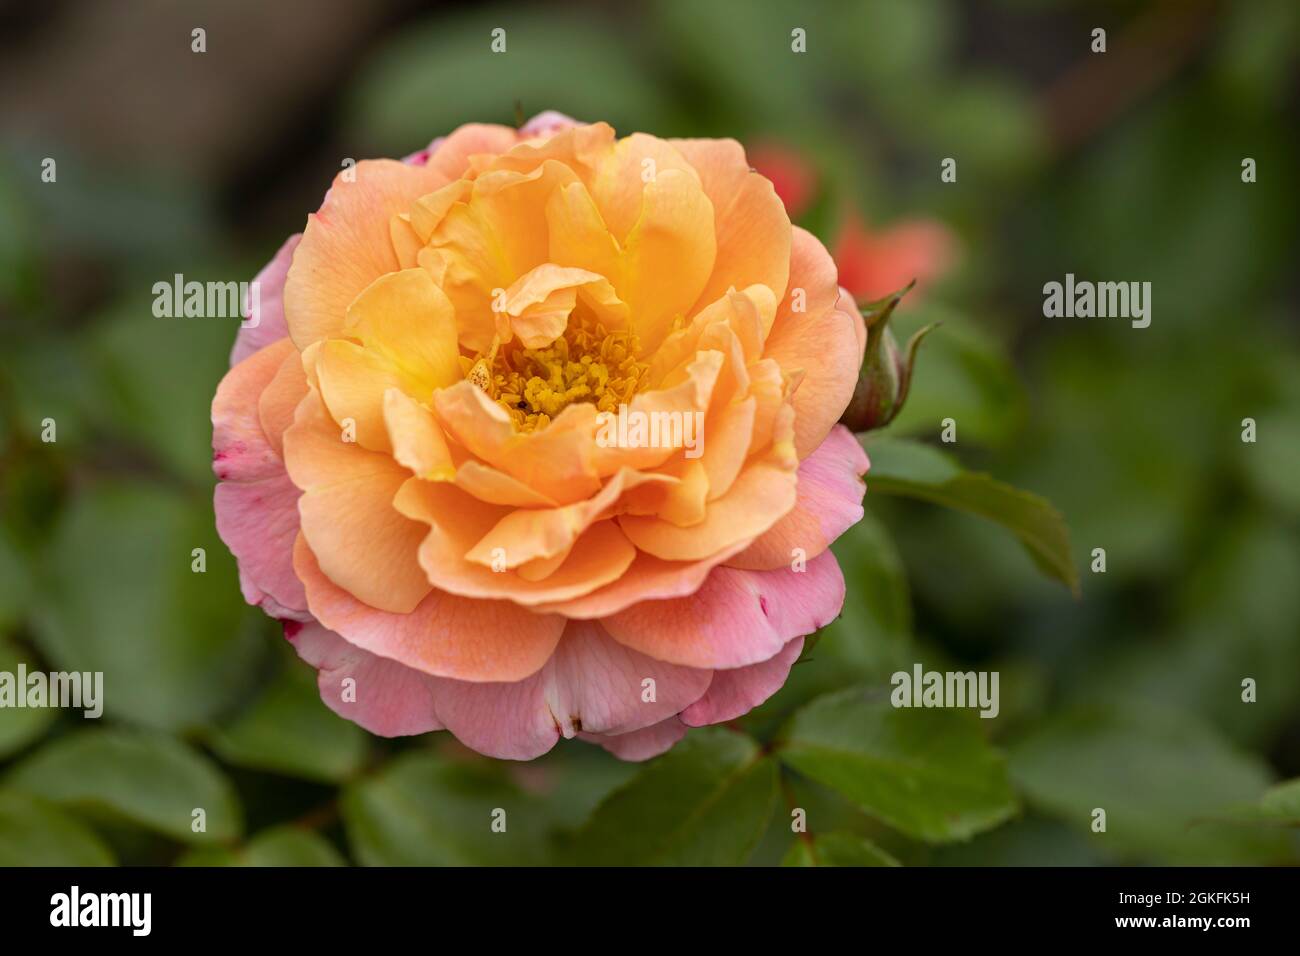 Close up of a beautiful rose with pink / orange petals called Rosa Marie Curie. A floribunda rose flowering in the UK Stock Photo